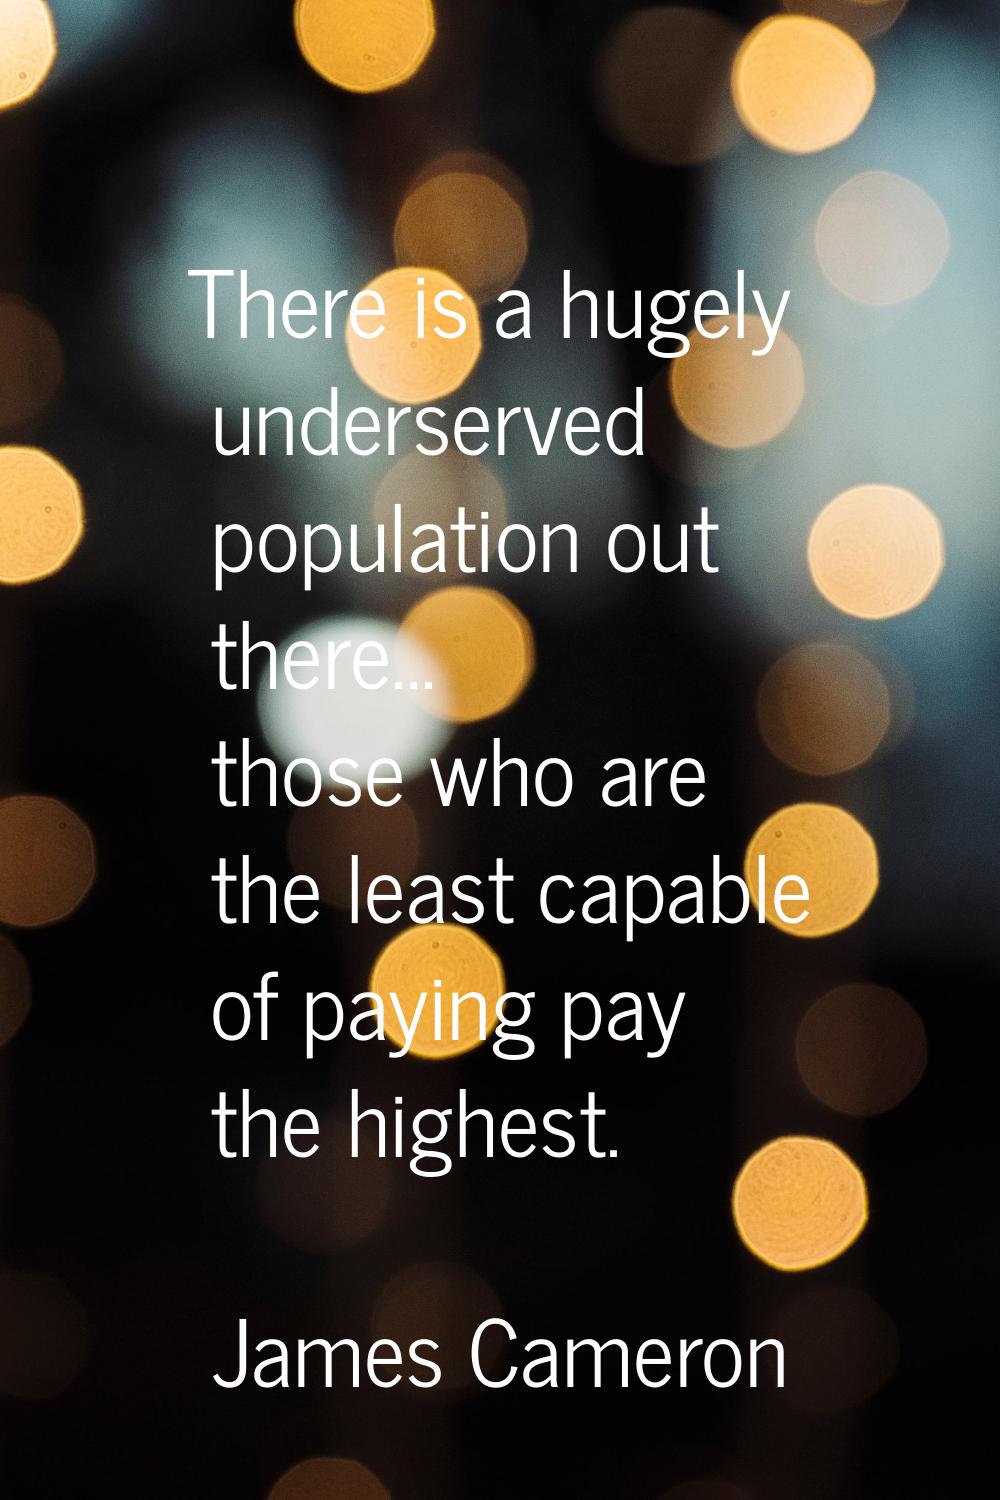 There is a hugely underserved population out there... those who are the least capable of paying pay